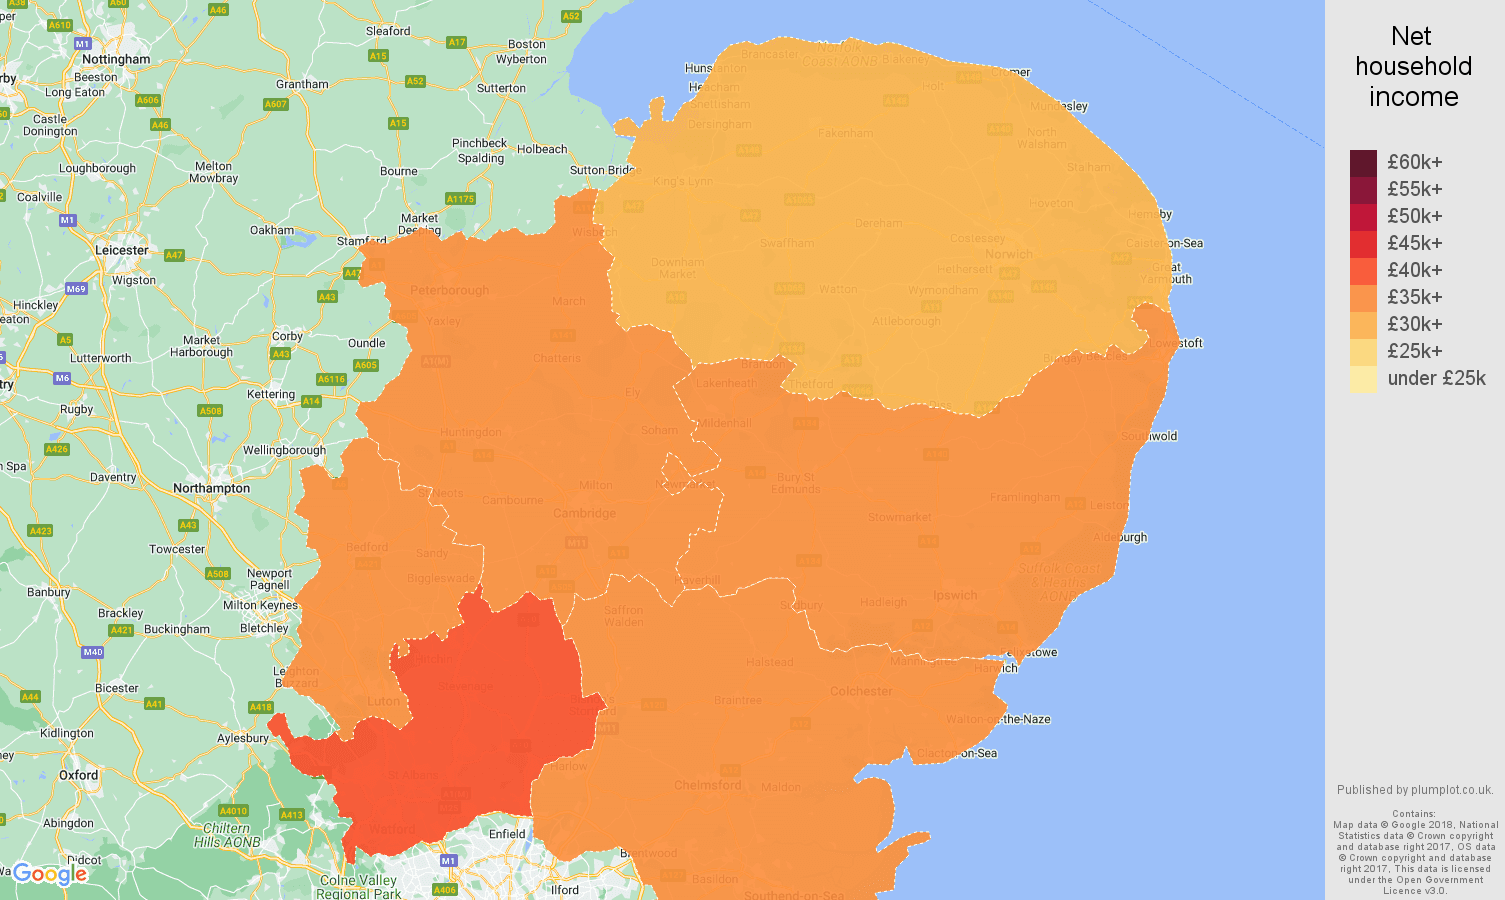 East of England net household income map